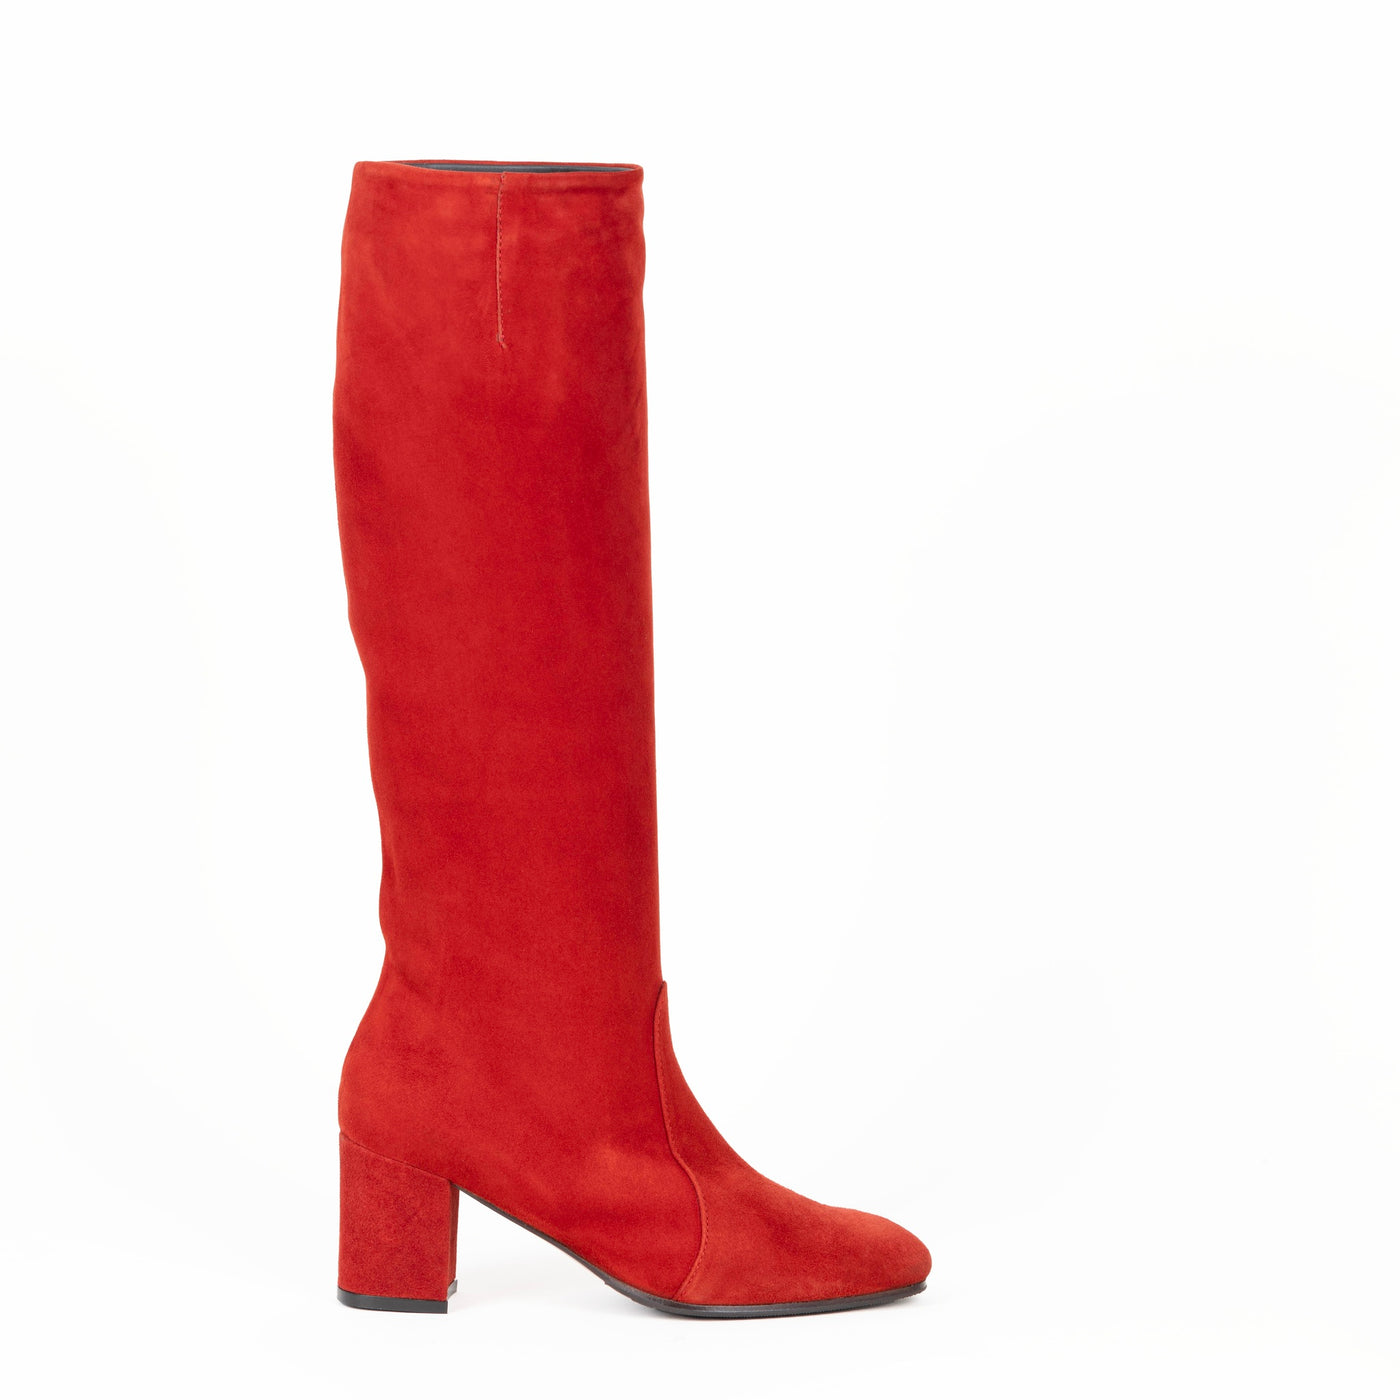 Red Suede Knee-High Boots